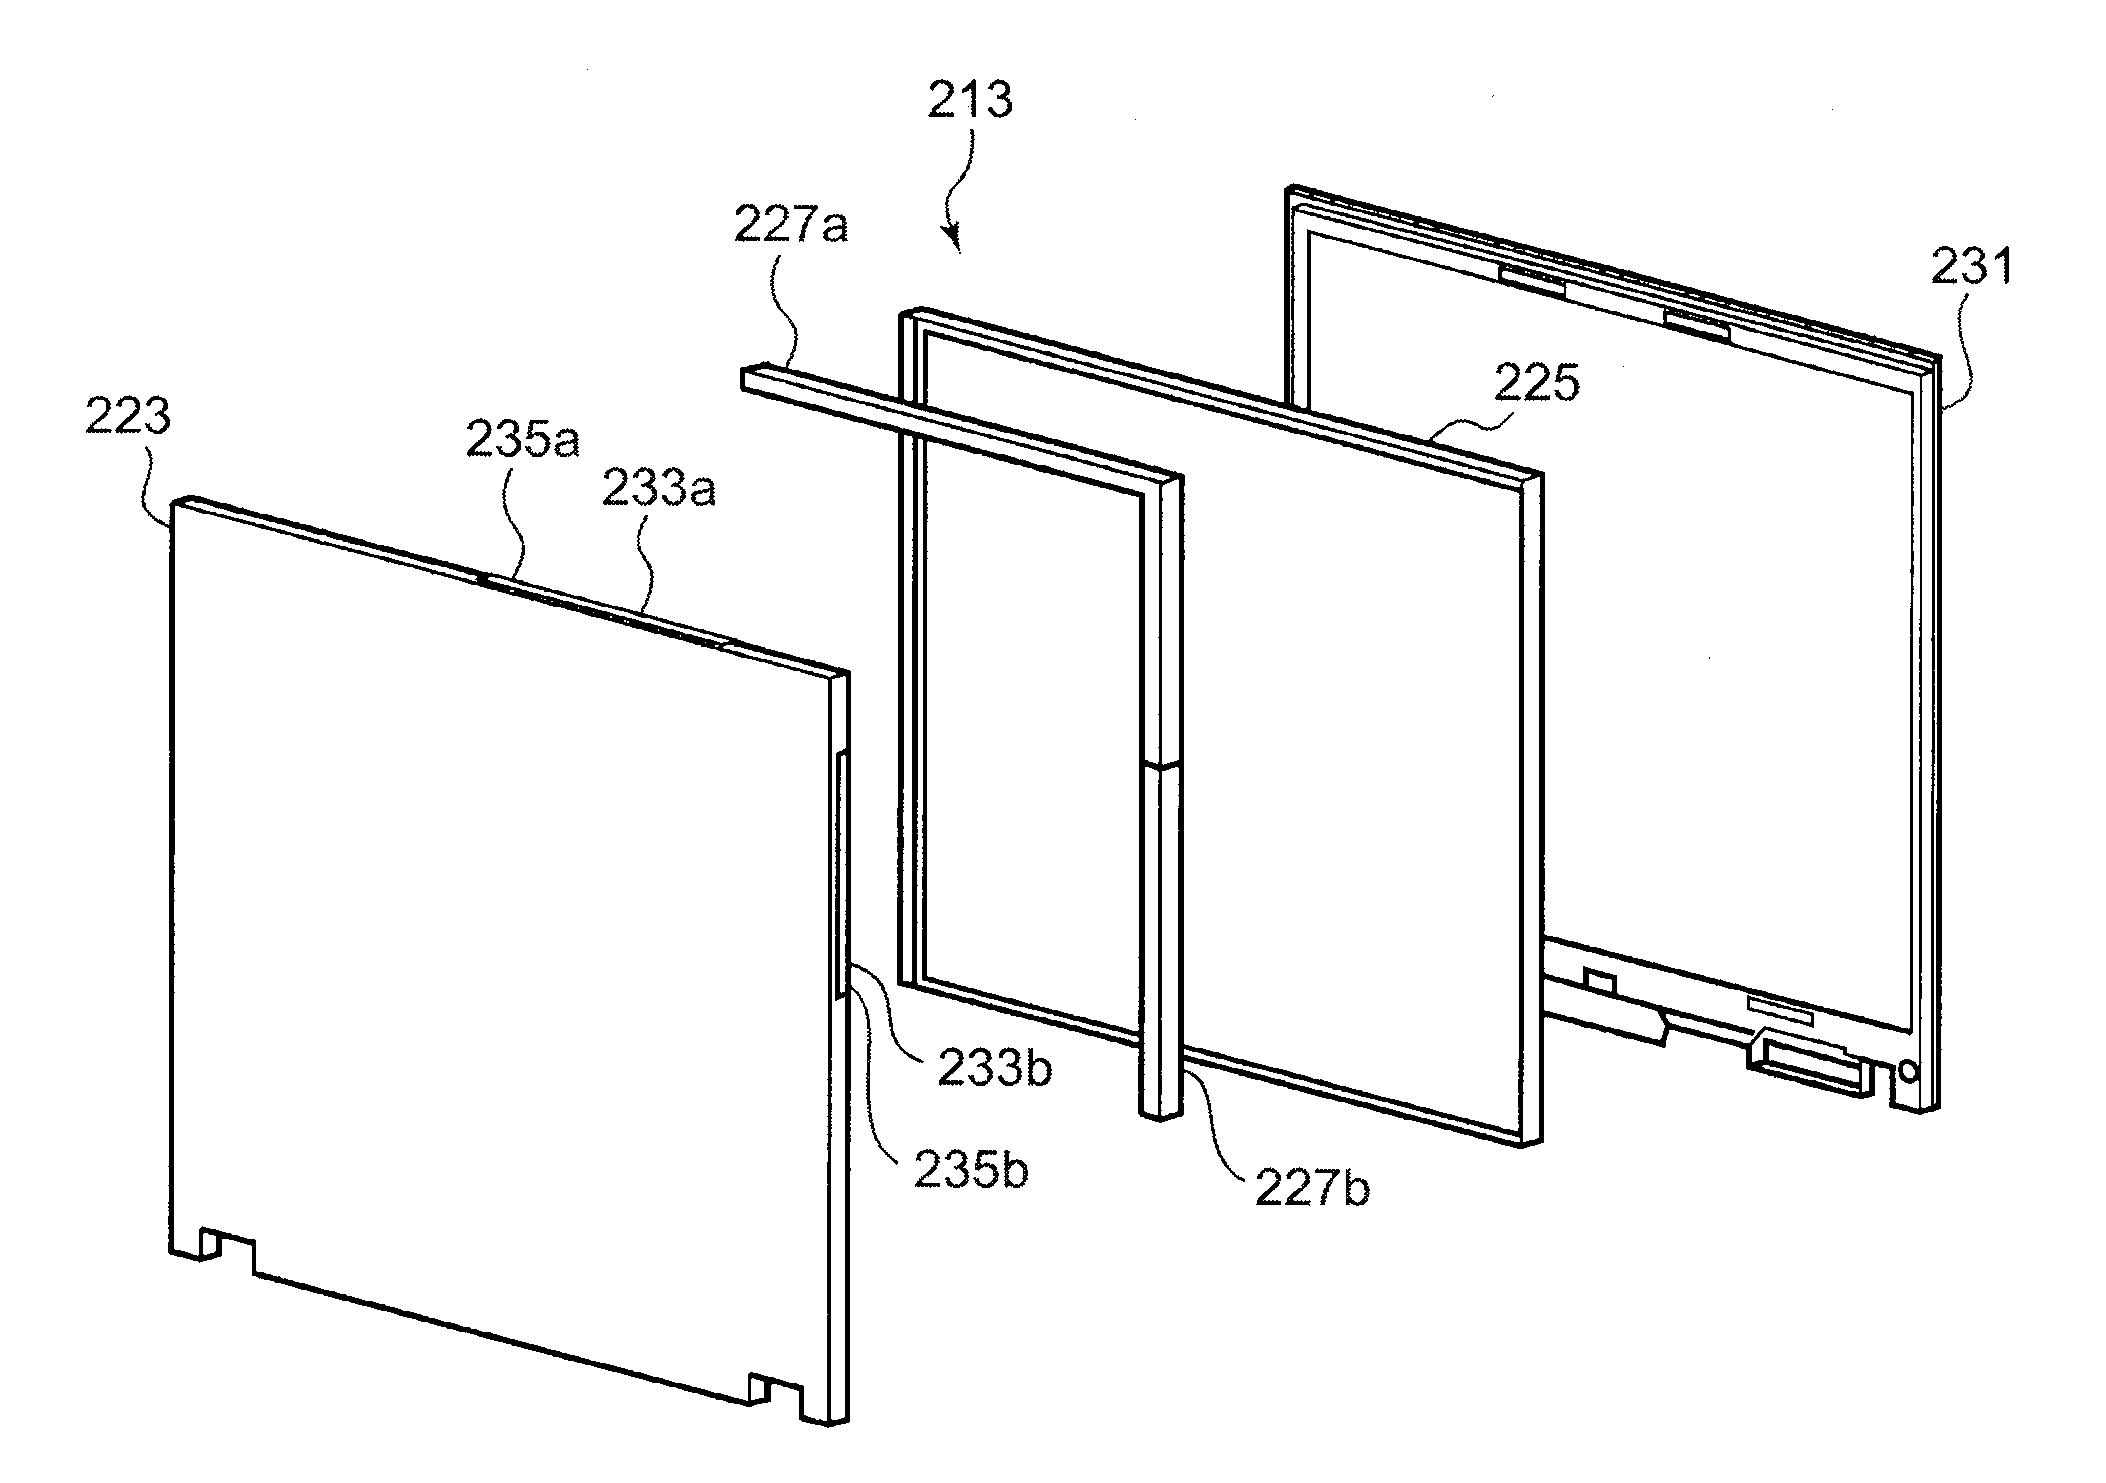 Antenna mounting for electronic devices